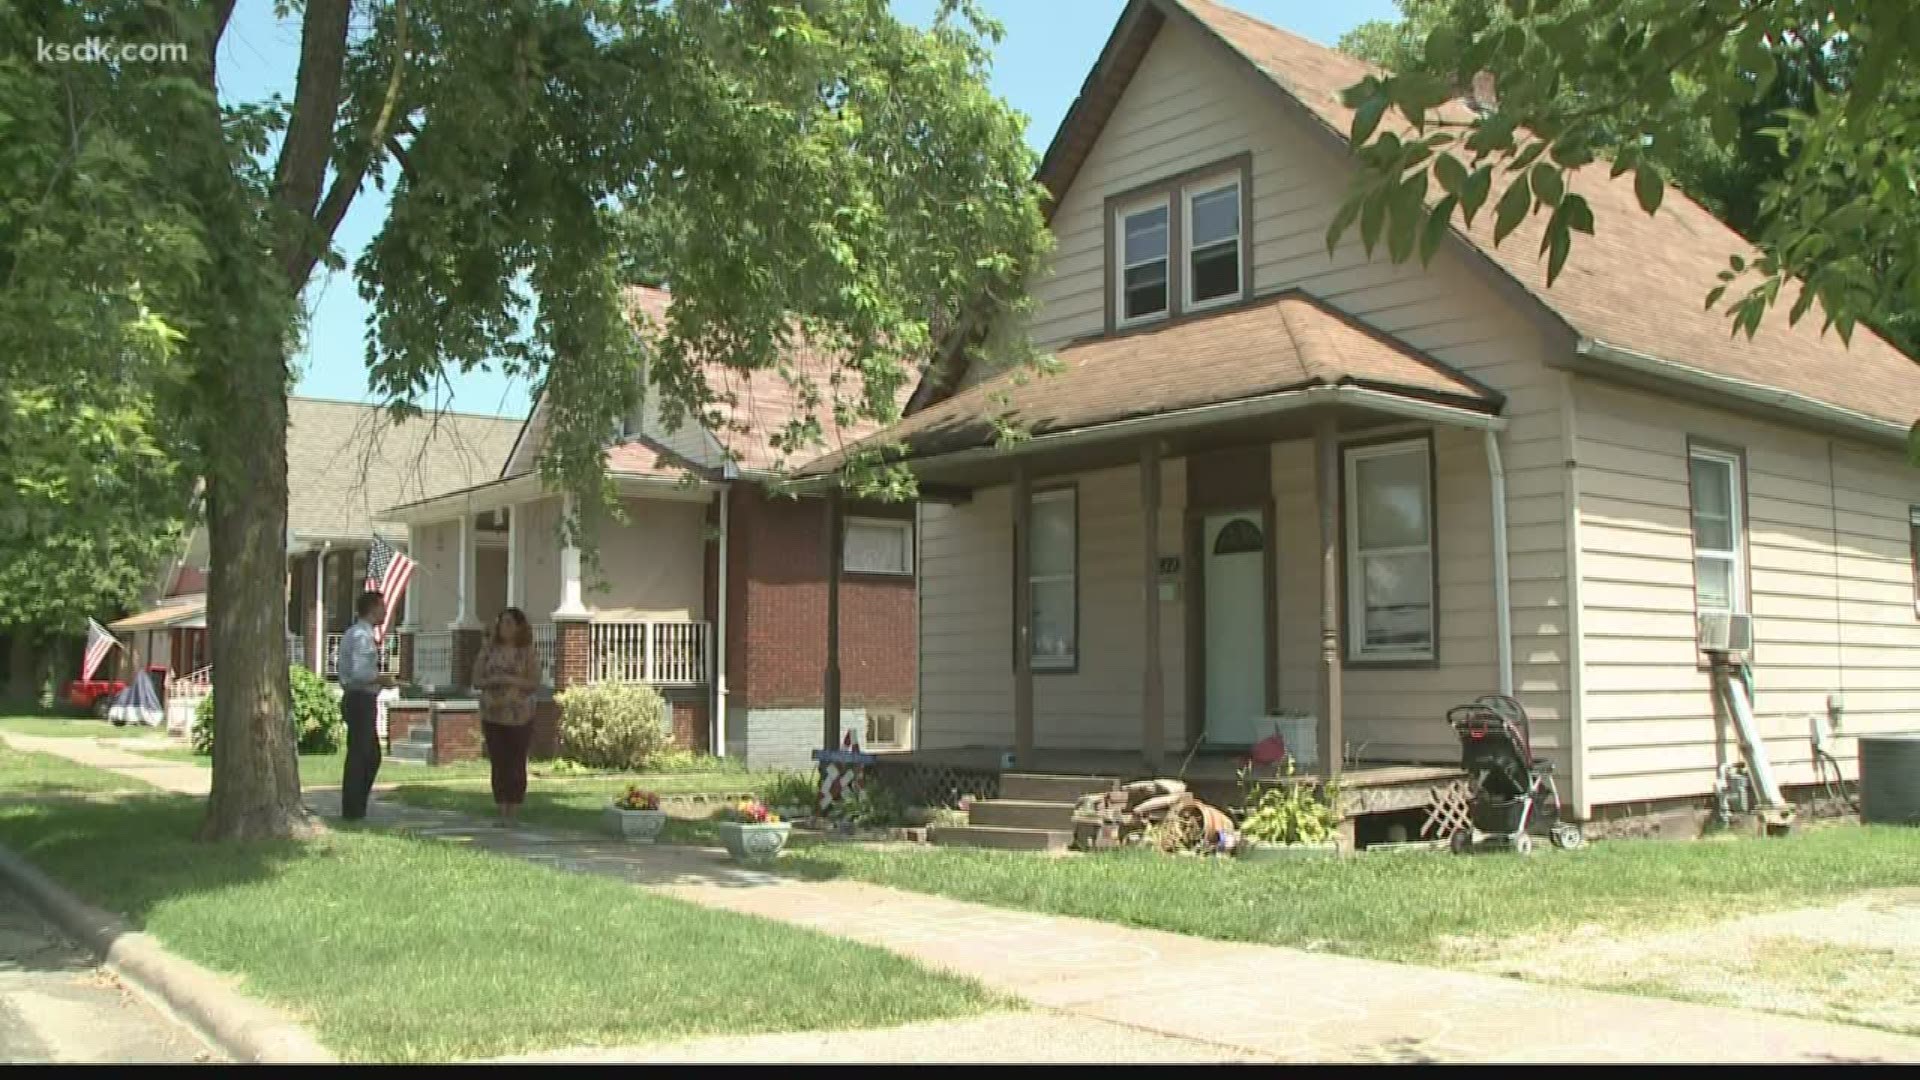 A family says they're being illegally kicked out of their home for something that didn't even involve them.